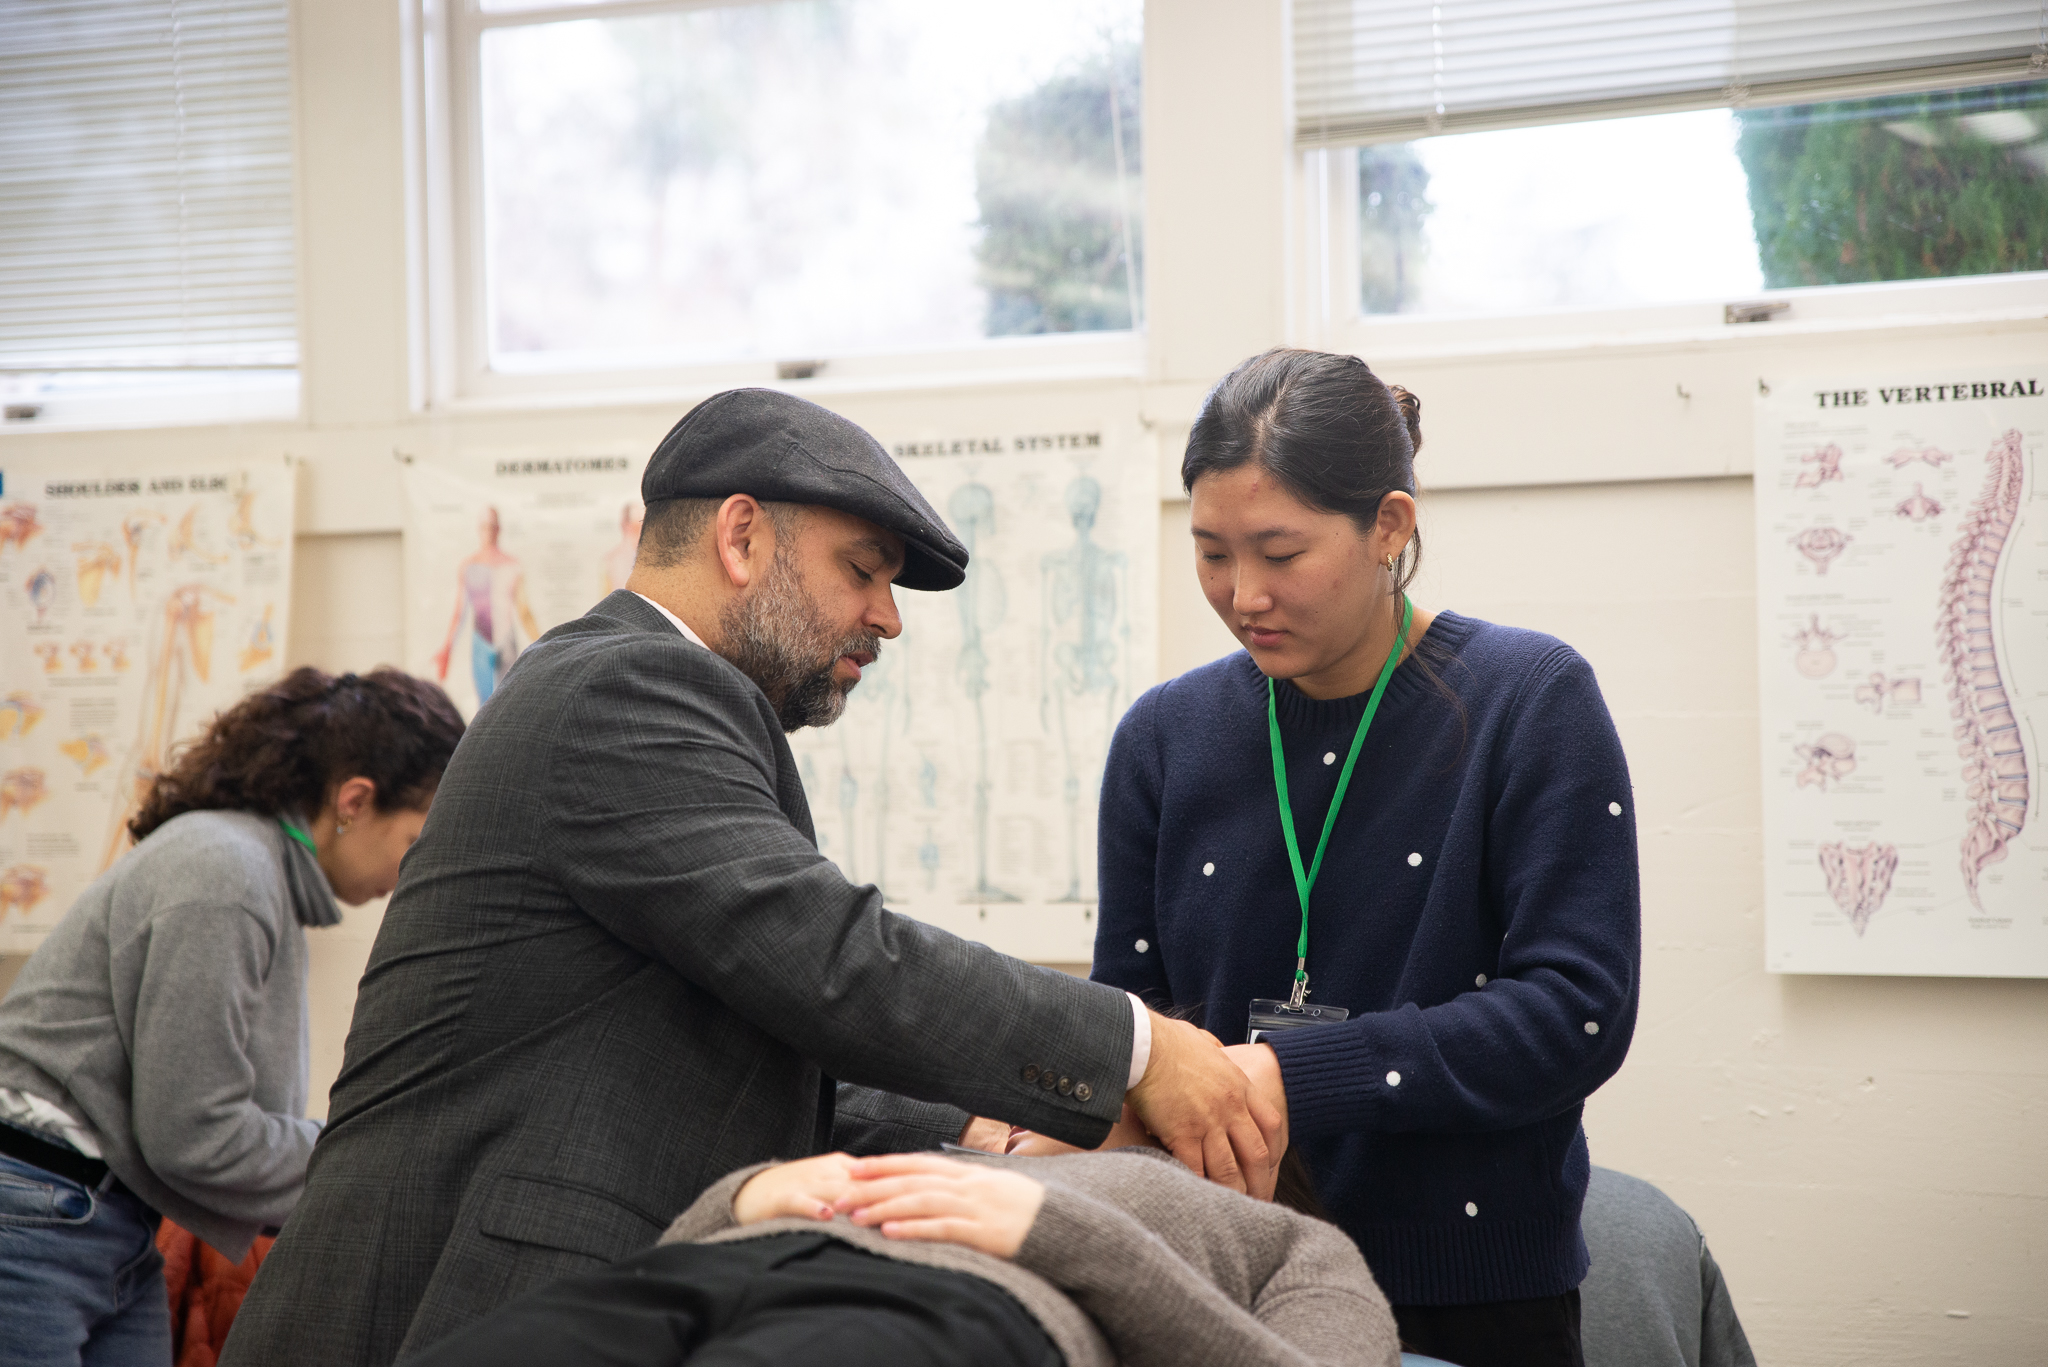  Associate Professor Dr. Victor Nuno demonstrates Osteopathic Manipulative Medicine to a symposium attendee